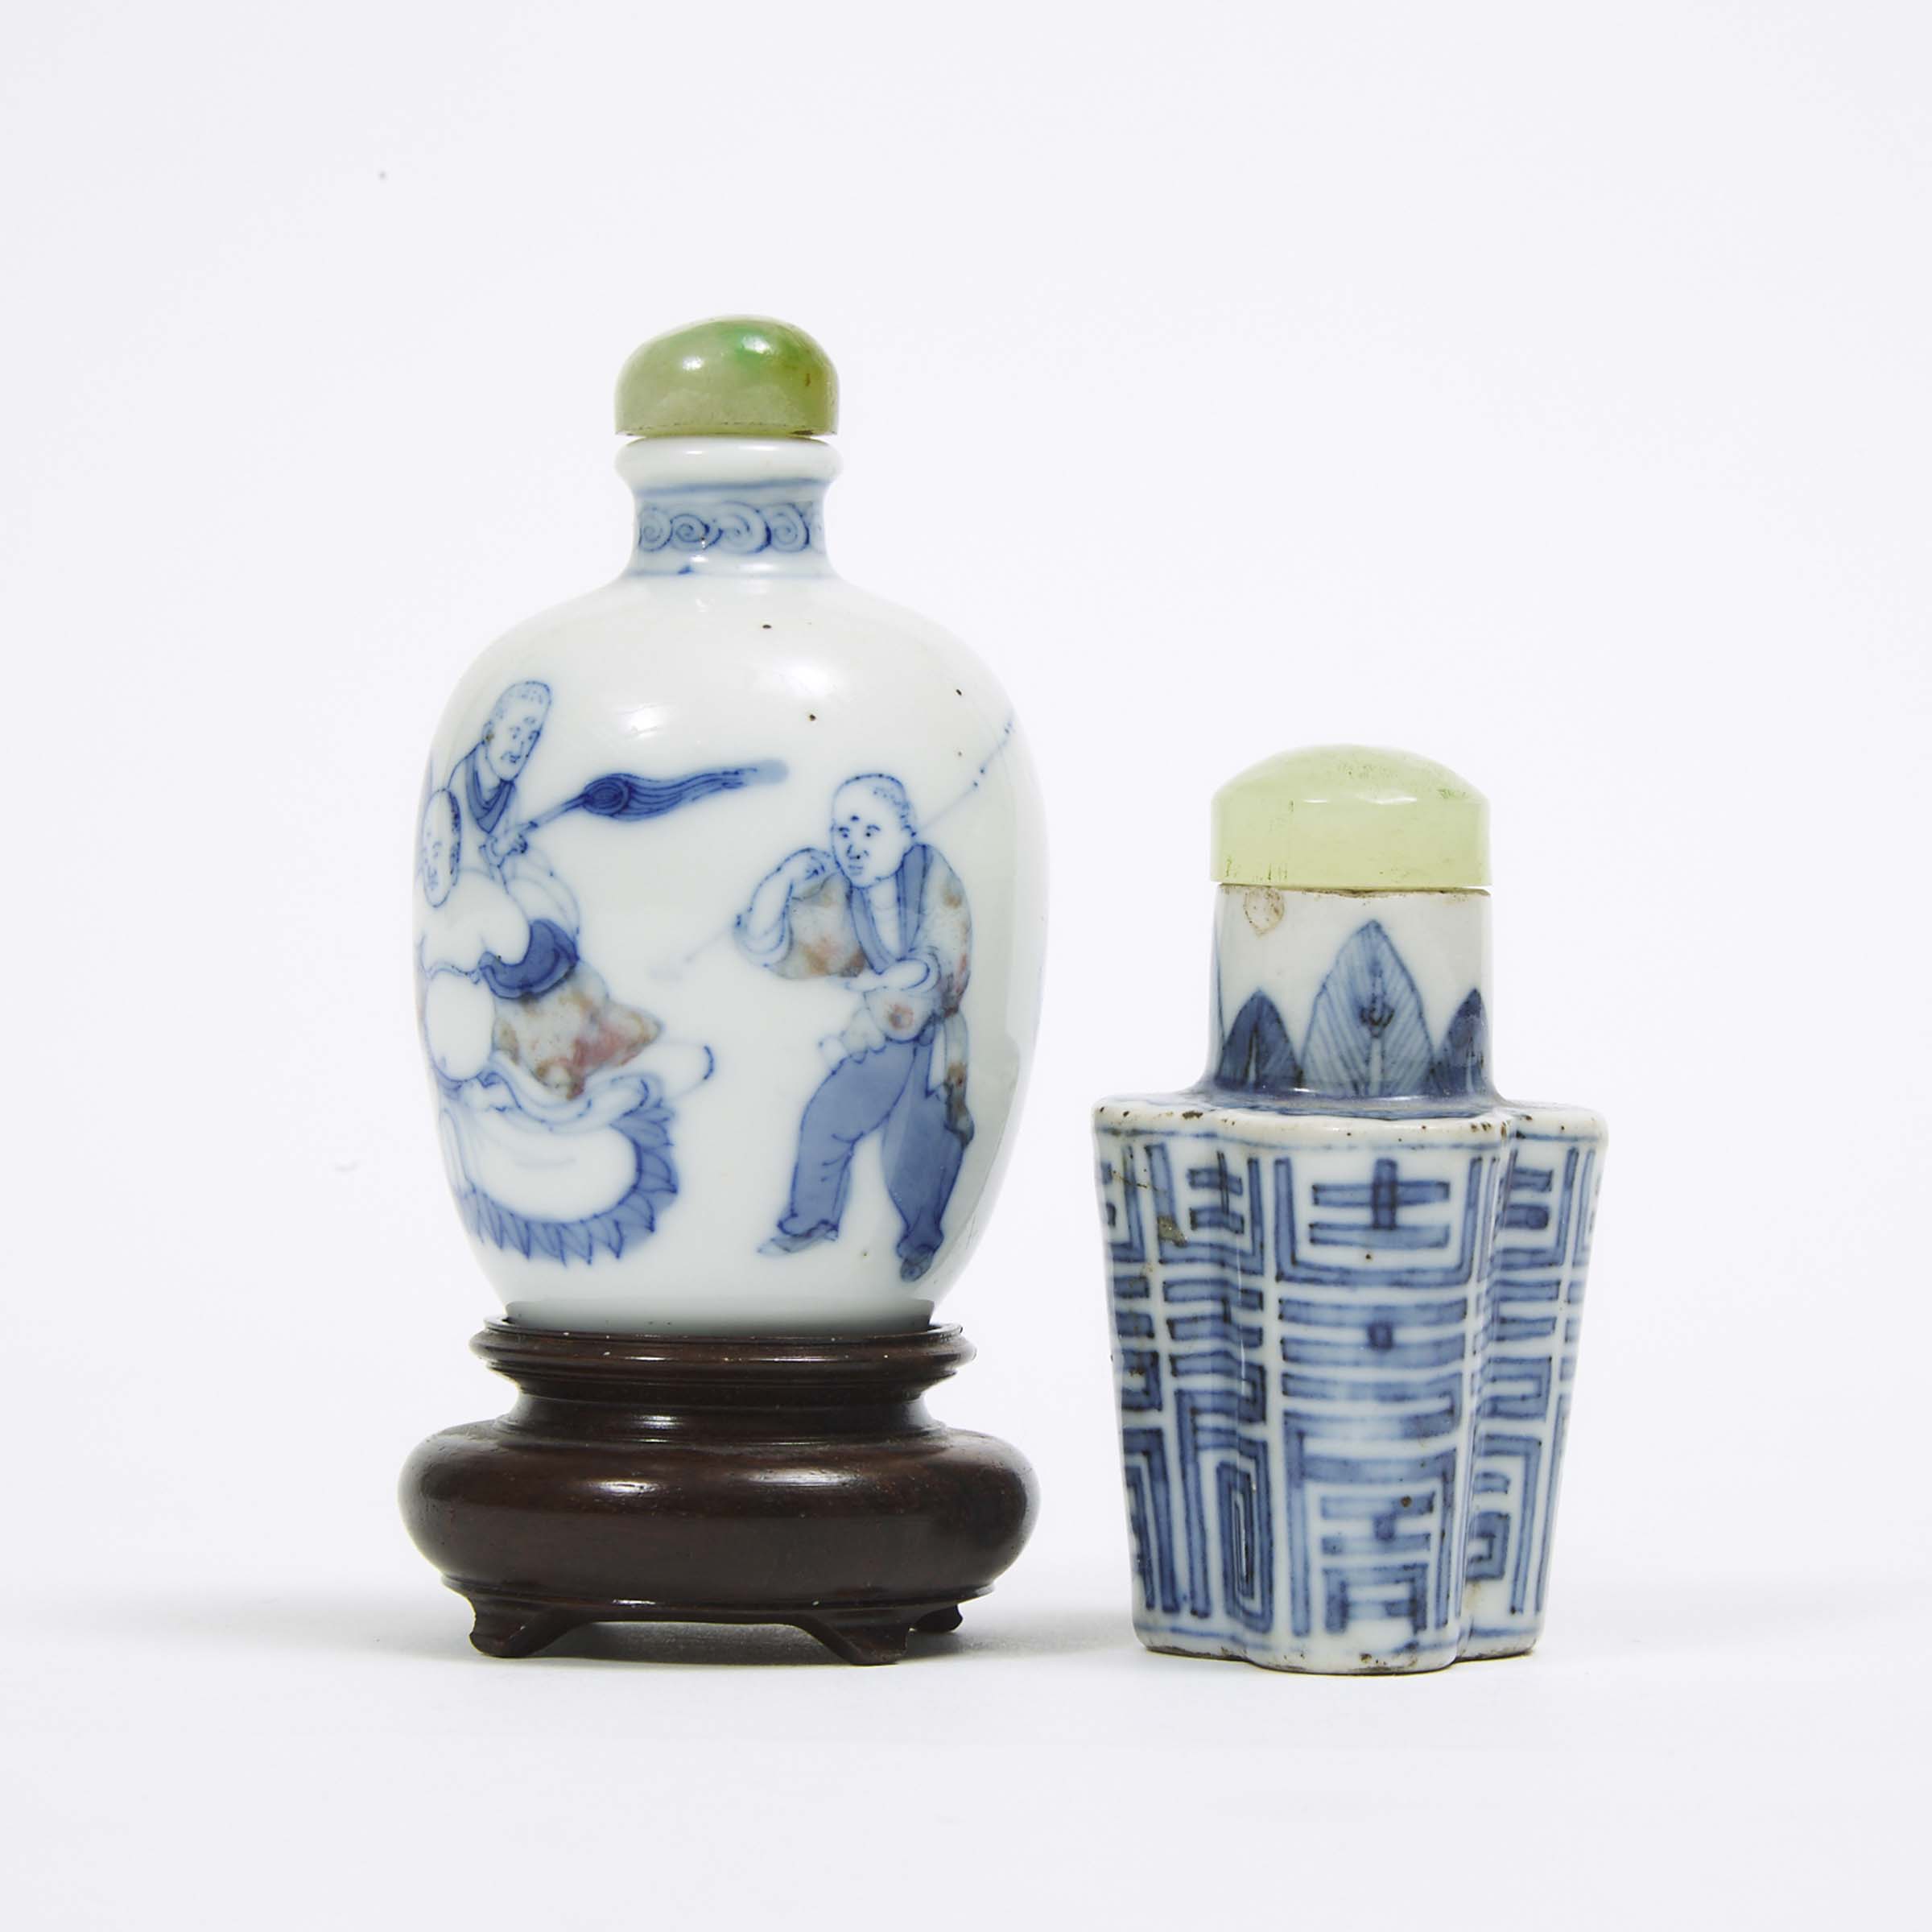 Two Blue and White Porcelain Snuff Bottles, 19th Century